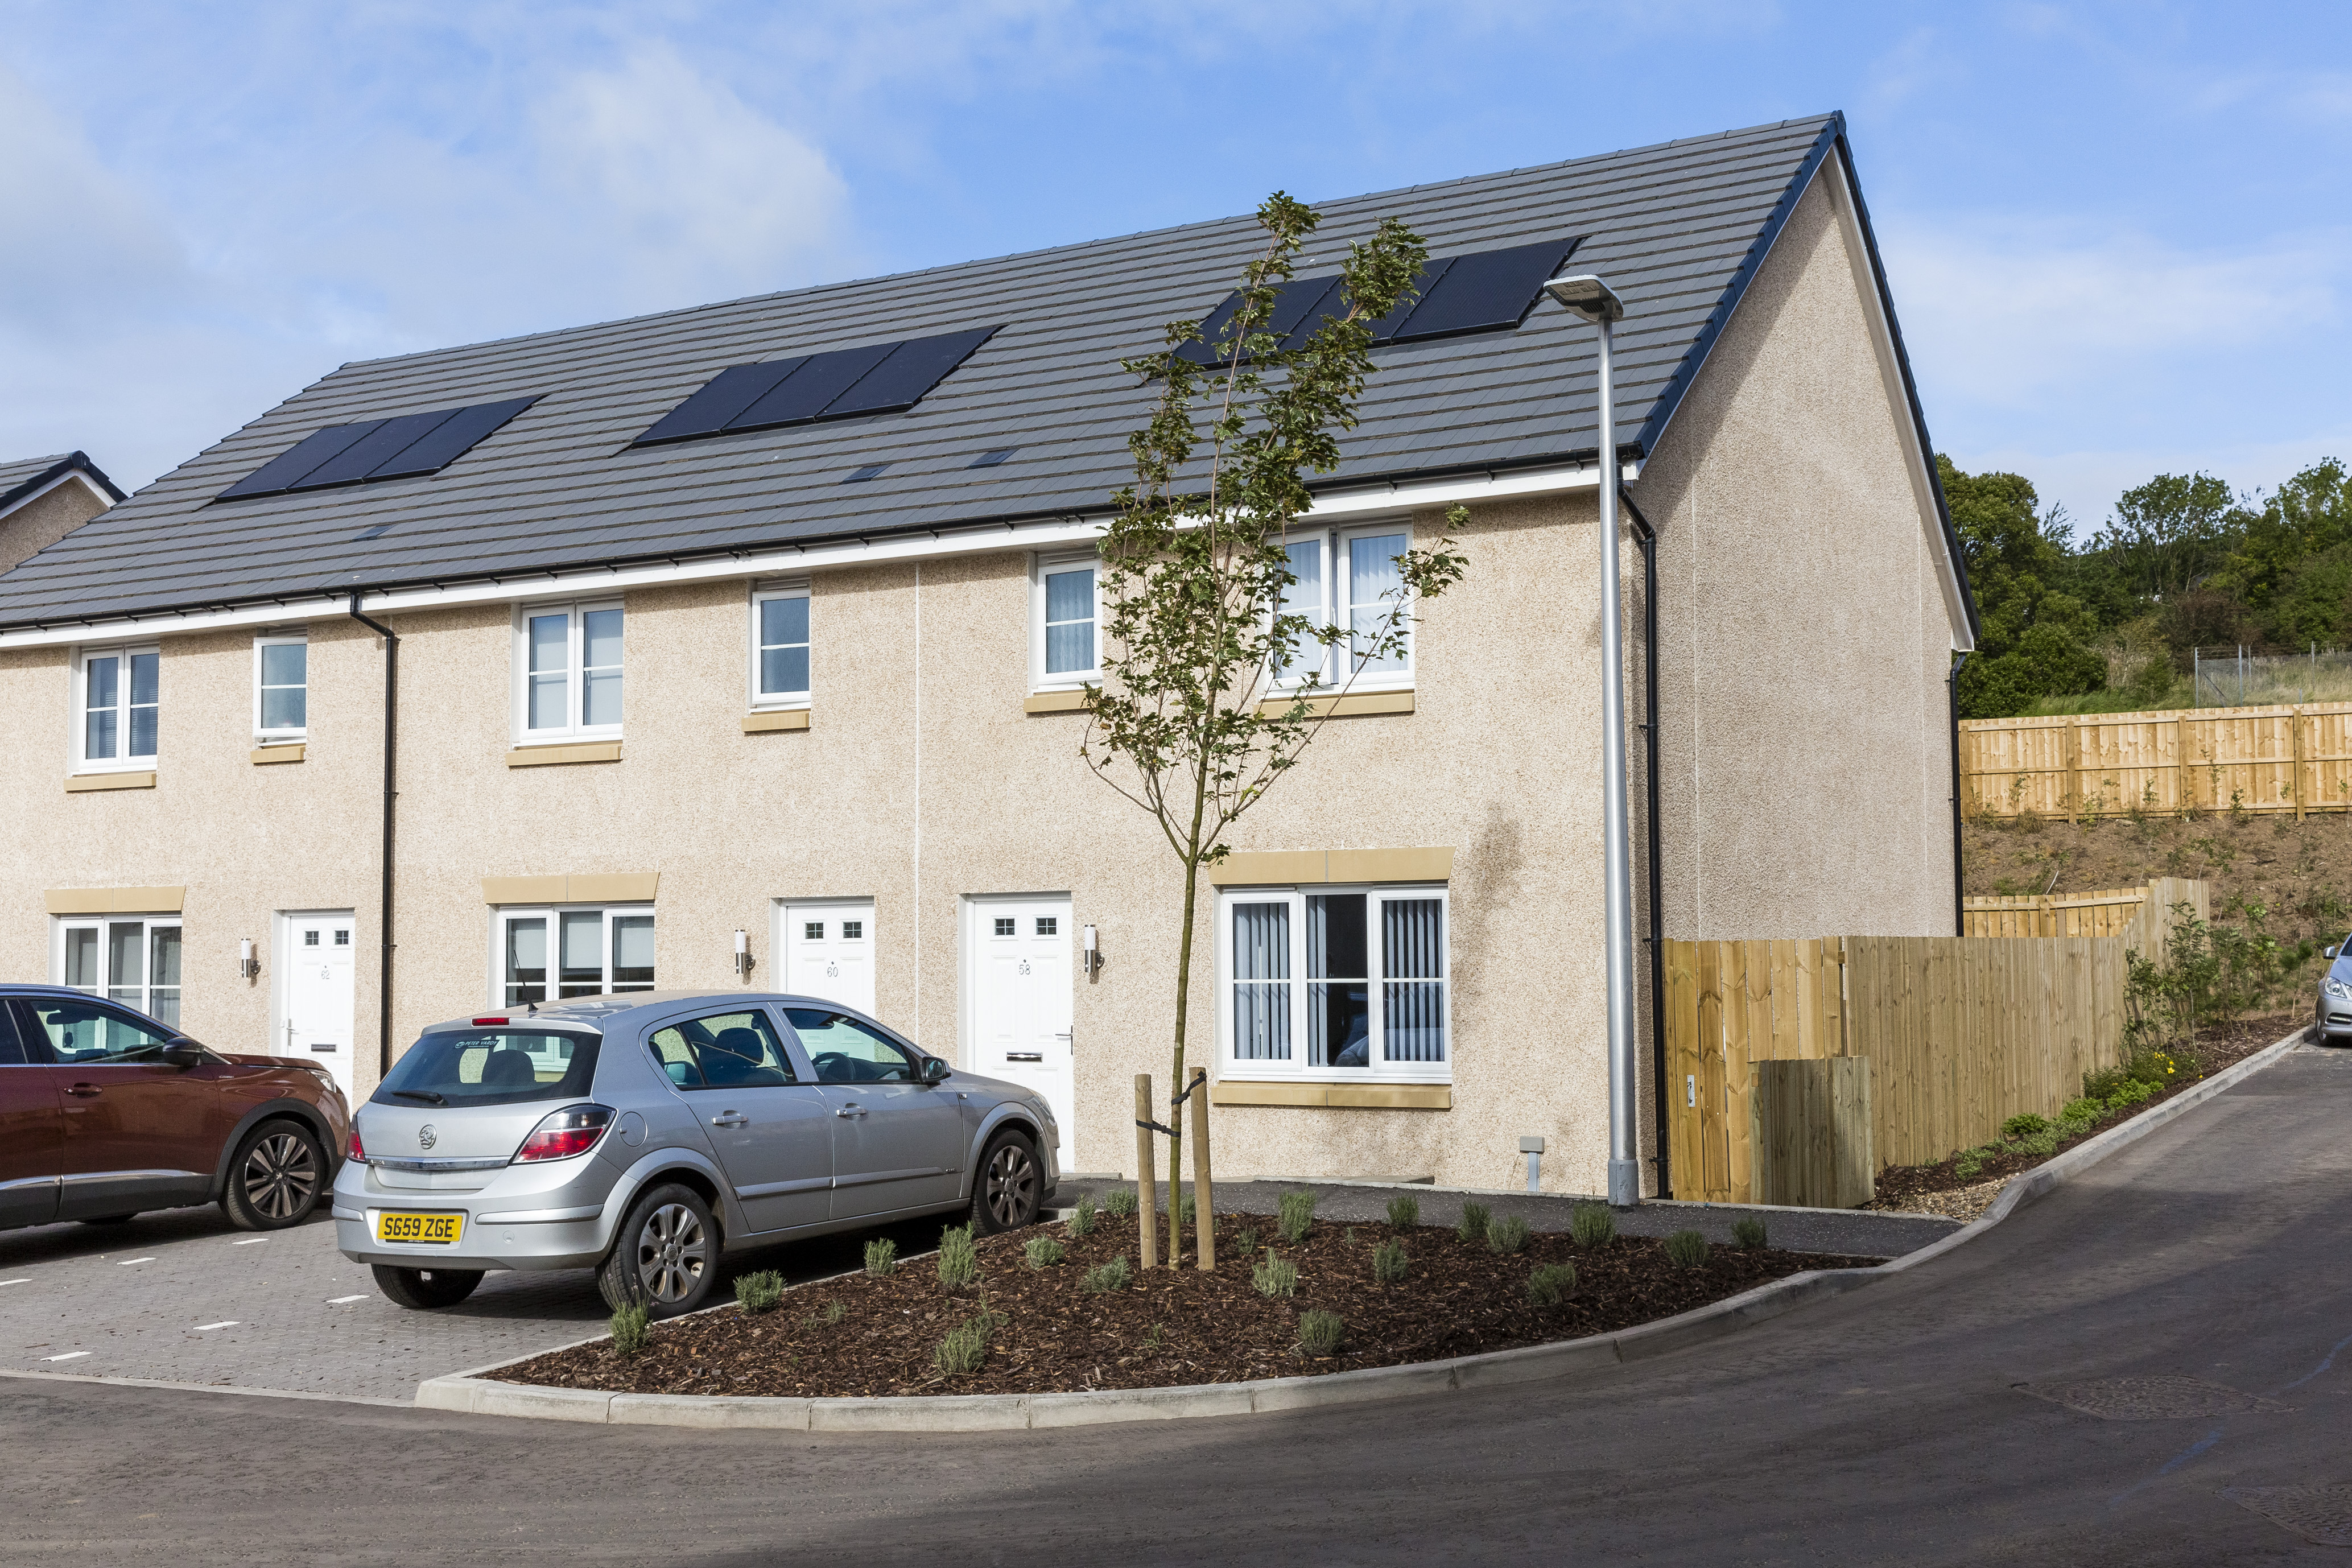 Housing association launches new homes in East Kilbride